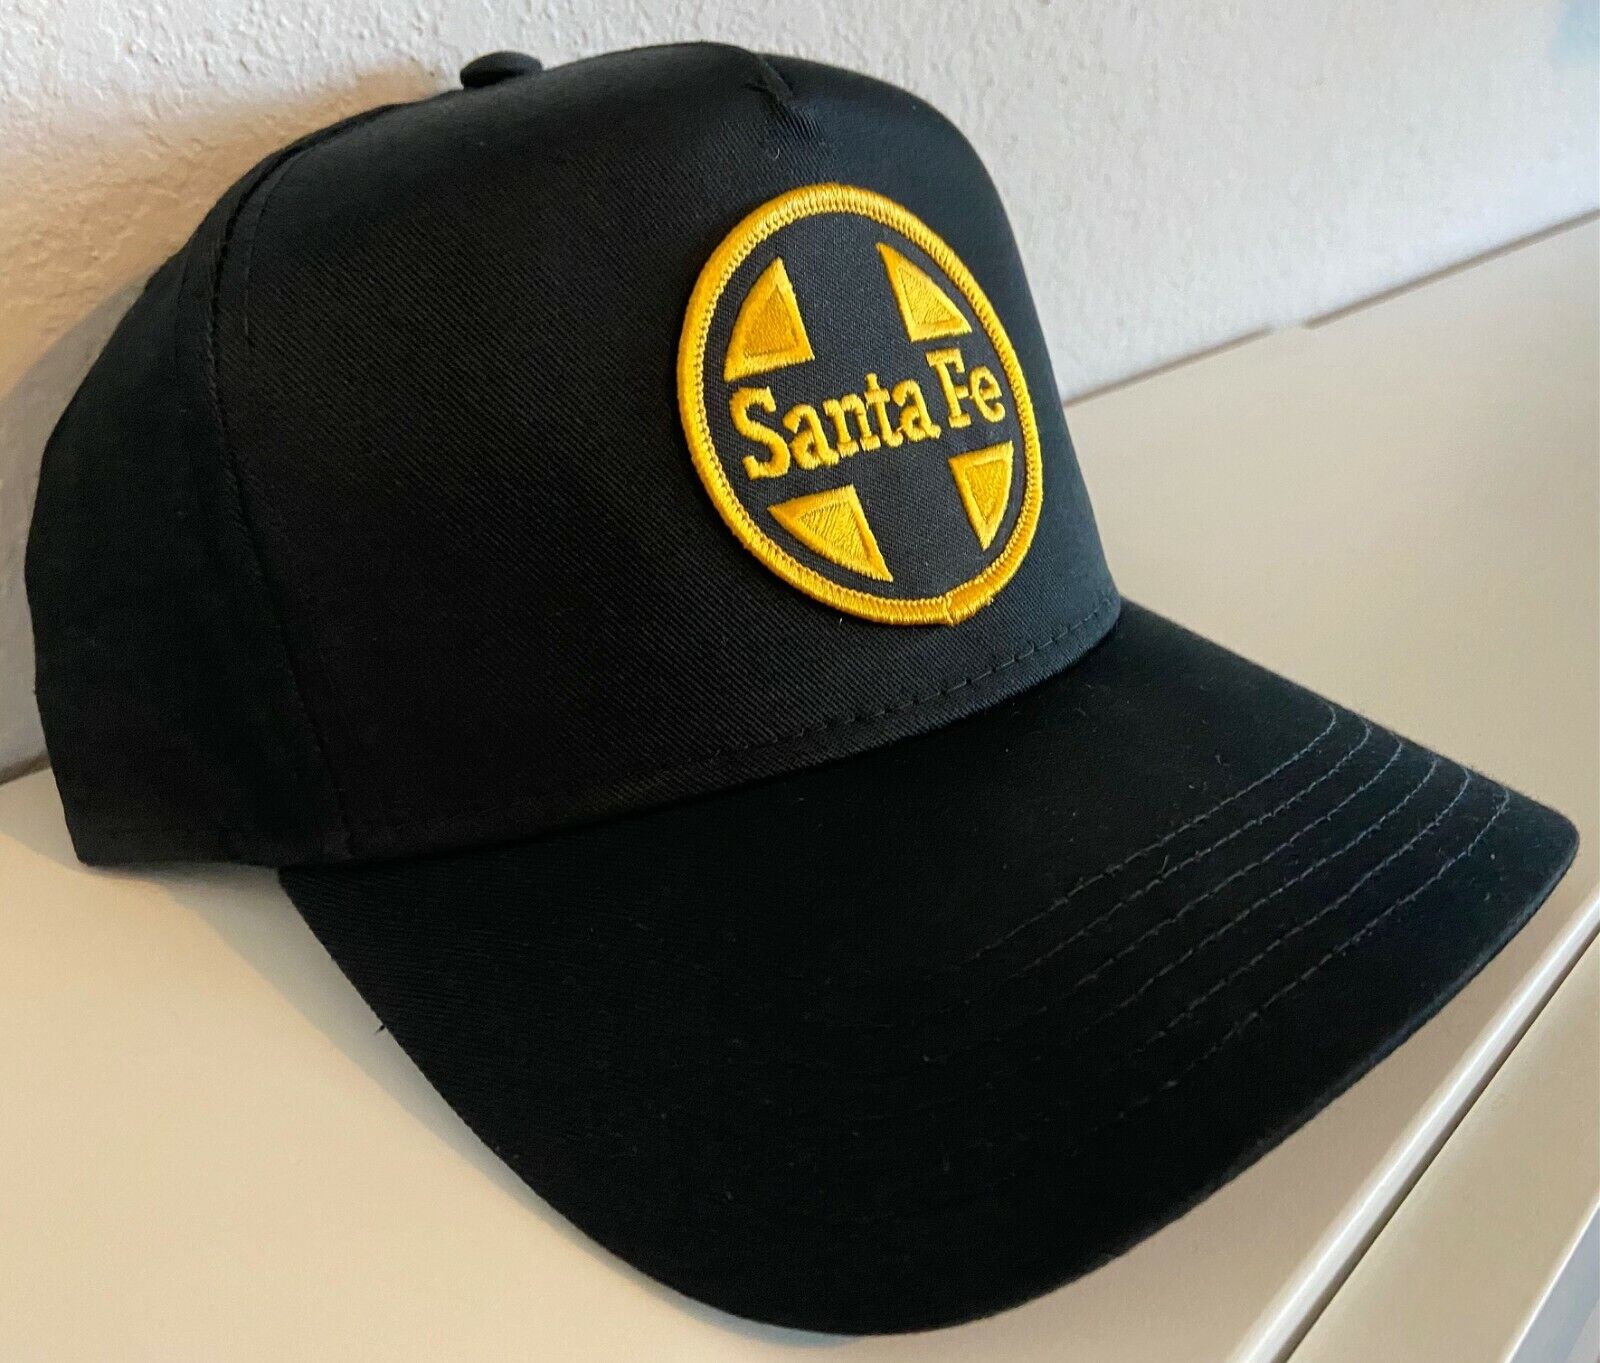 Cap / Hat - Santa Fe Railroad (ATSF ) with Gold and black patch- #22268 -NEW